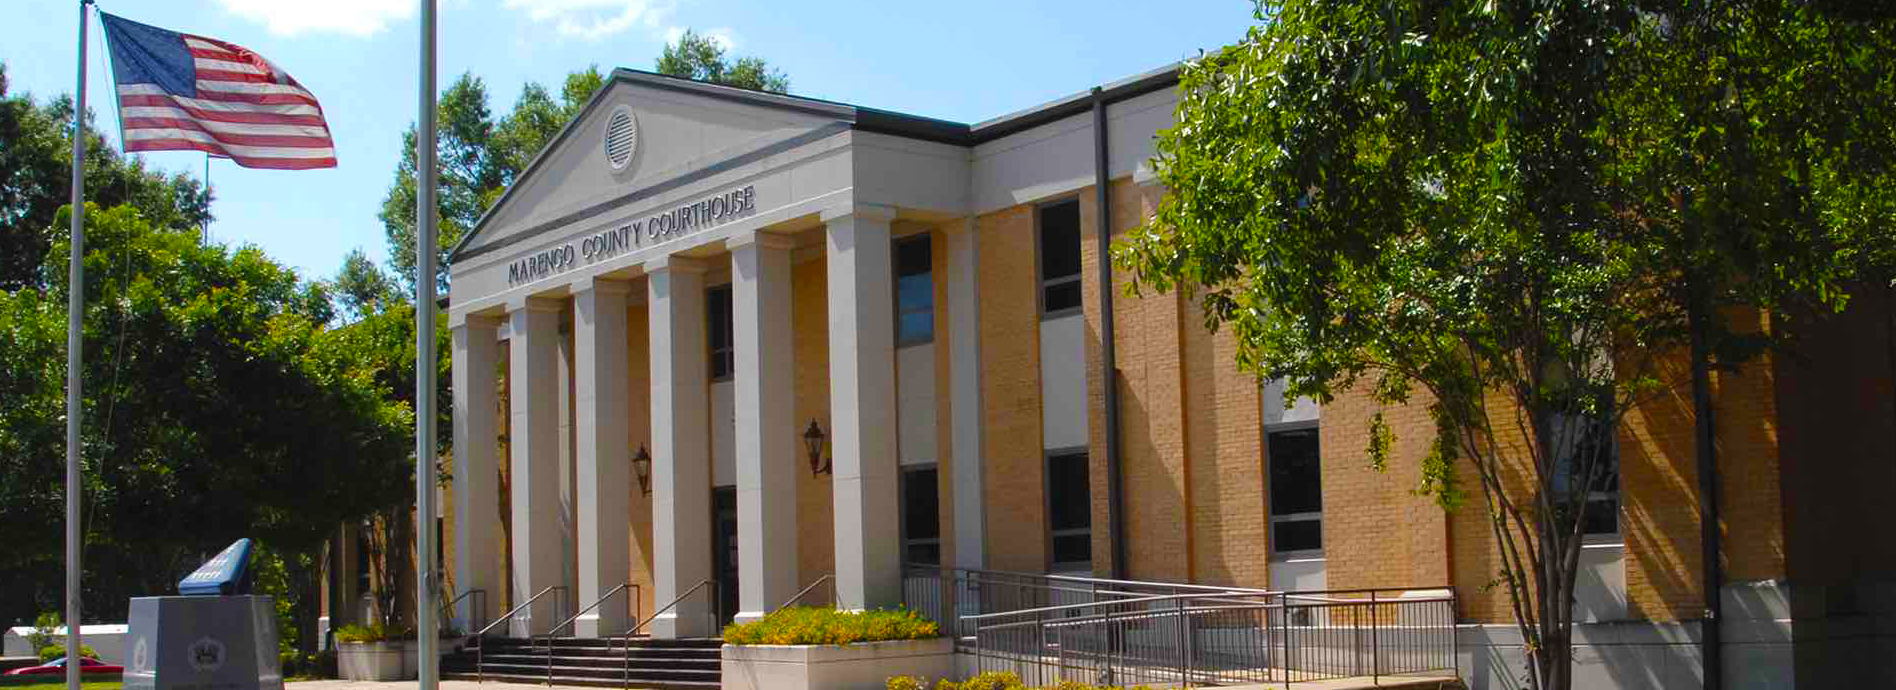 Image of Marengo County Revenue Commissioner Marengo County Courthouse